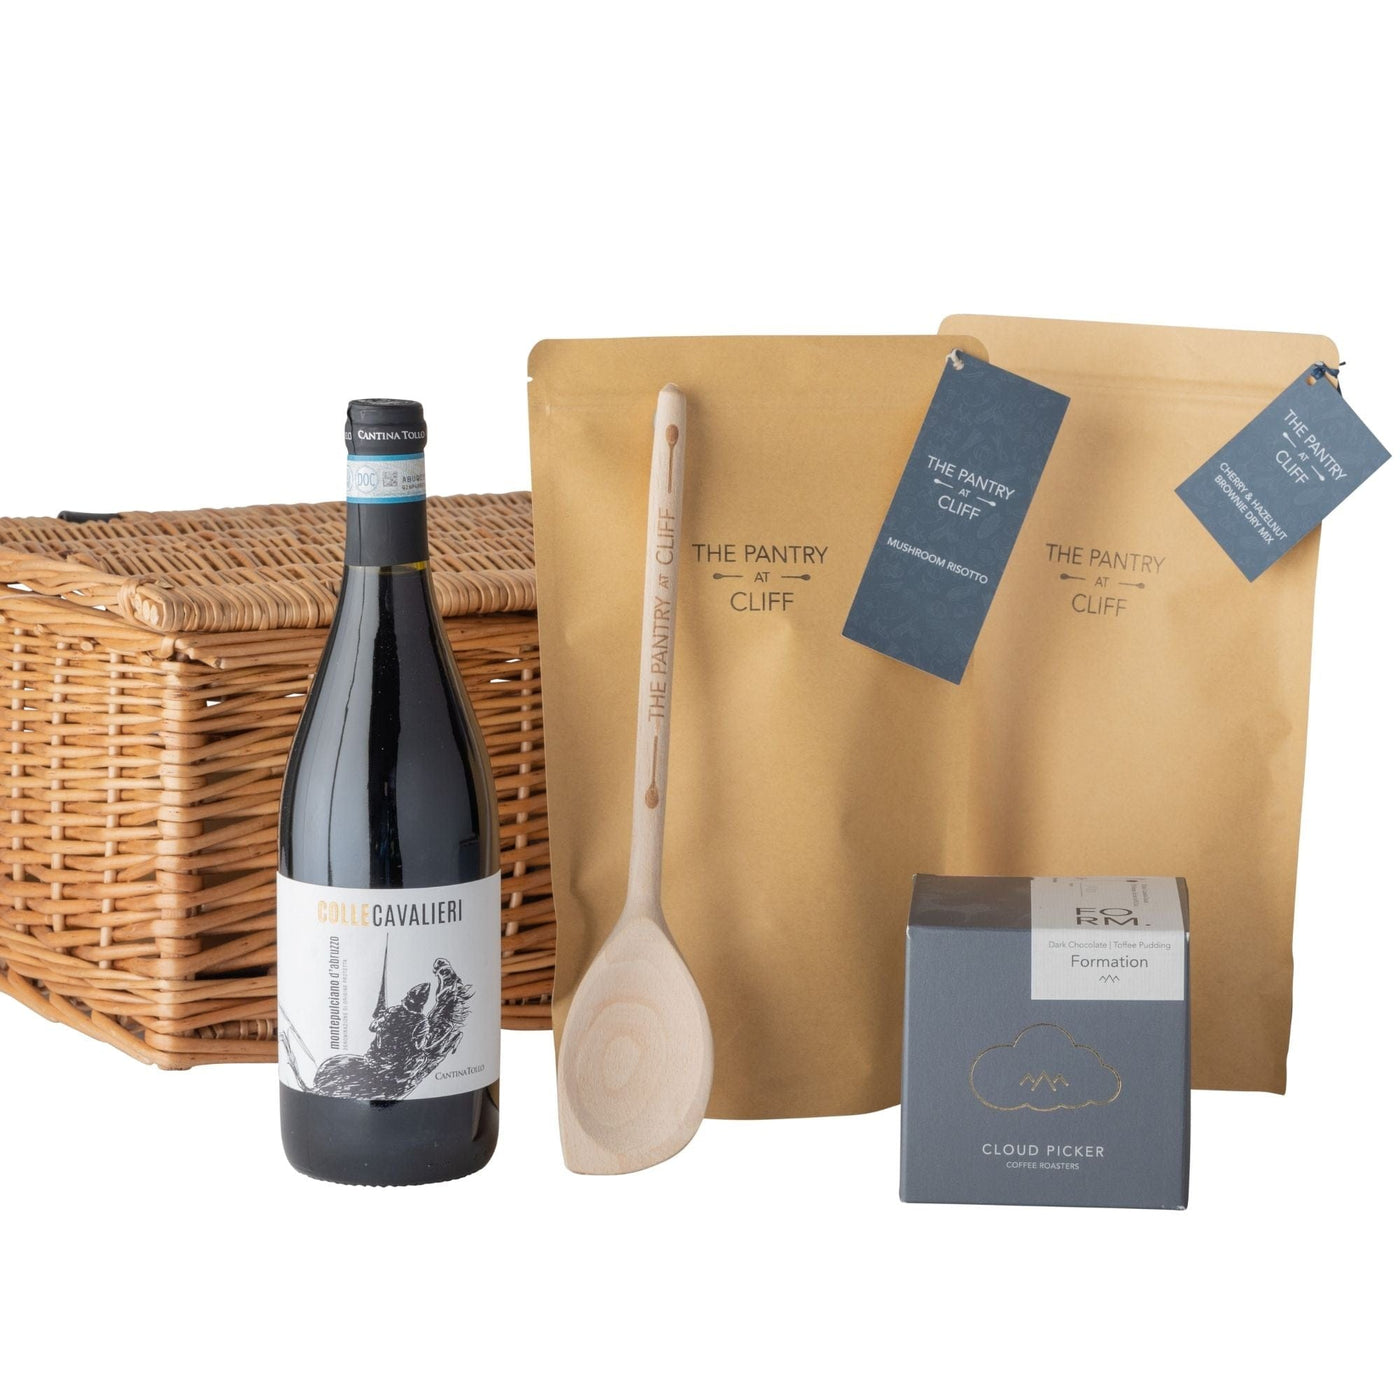 CLIFF Home Gift Box Pantry Supper Hamper